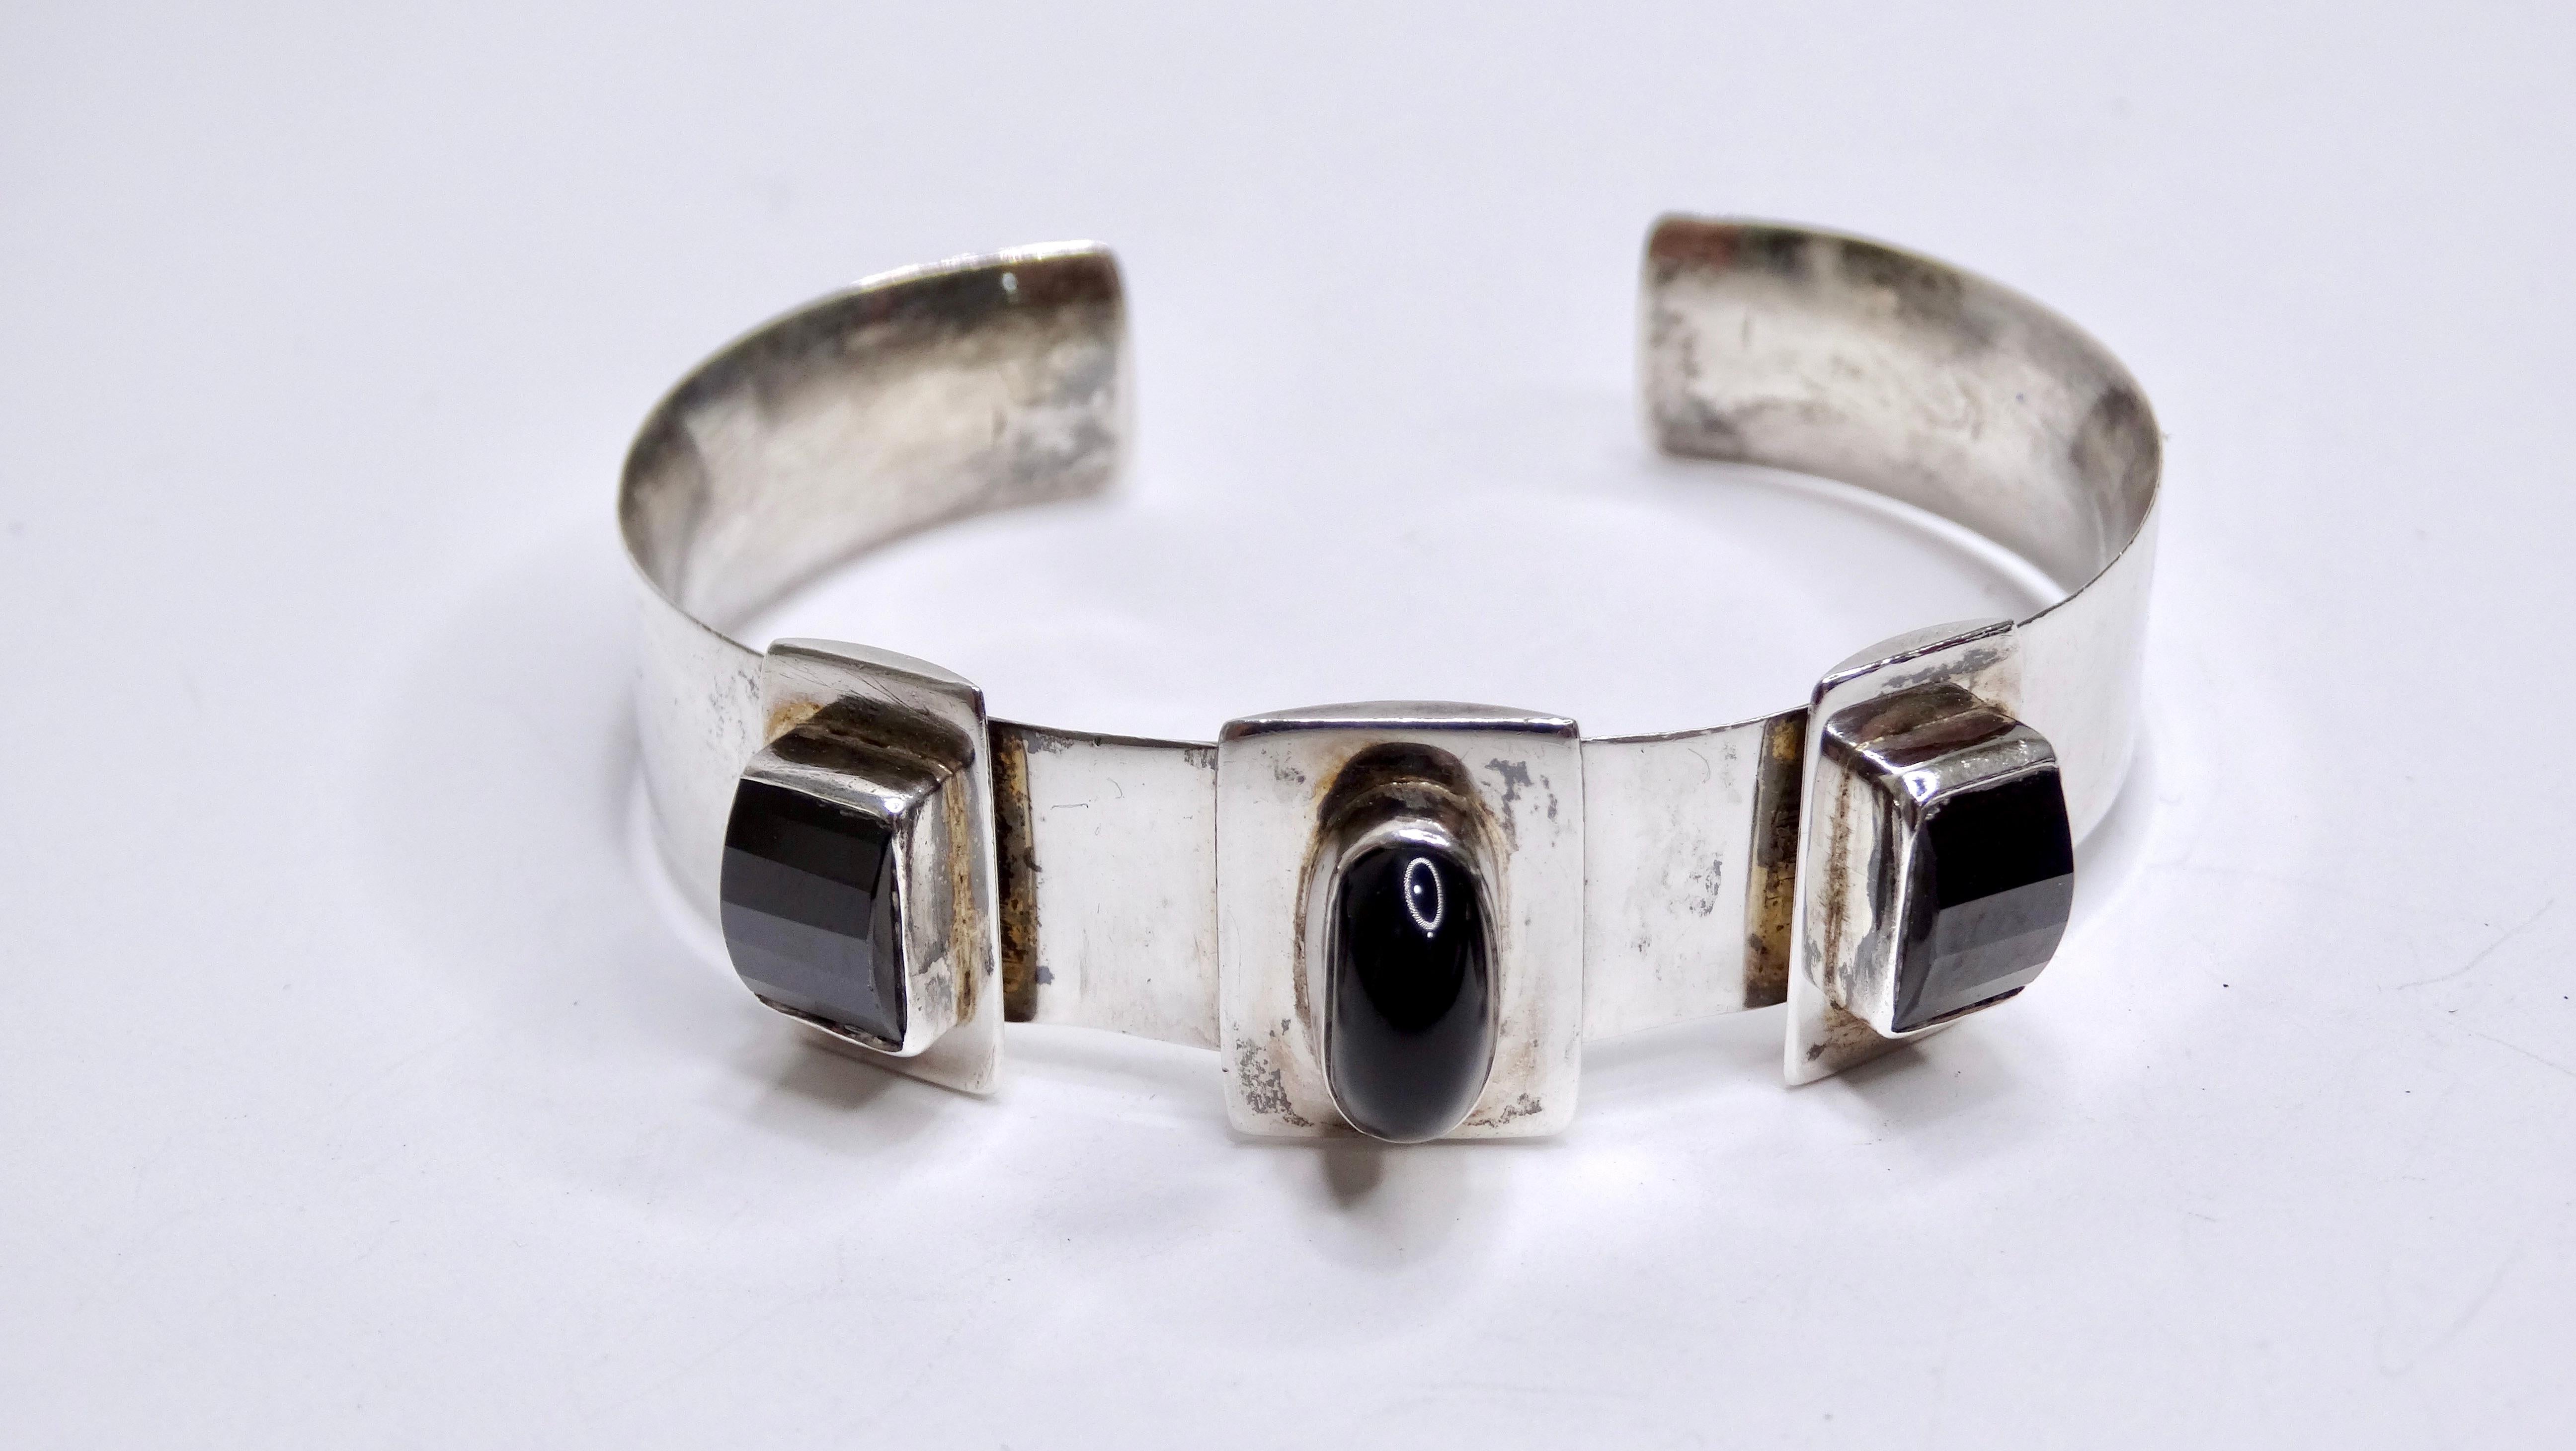 An amazing piece for a jewelry collector. Made of silver with three beautiful Onyx stones placed on the band. An oval cut stone is centered and paired with two rectangular cut stones. This modern and sleek bracelet would pair perfectly with Mugler